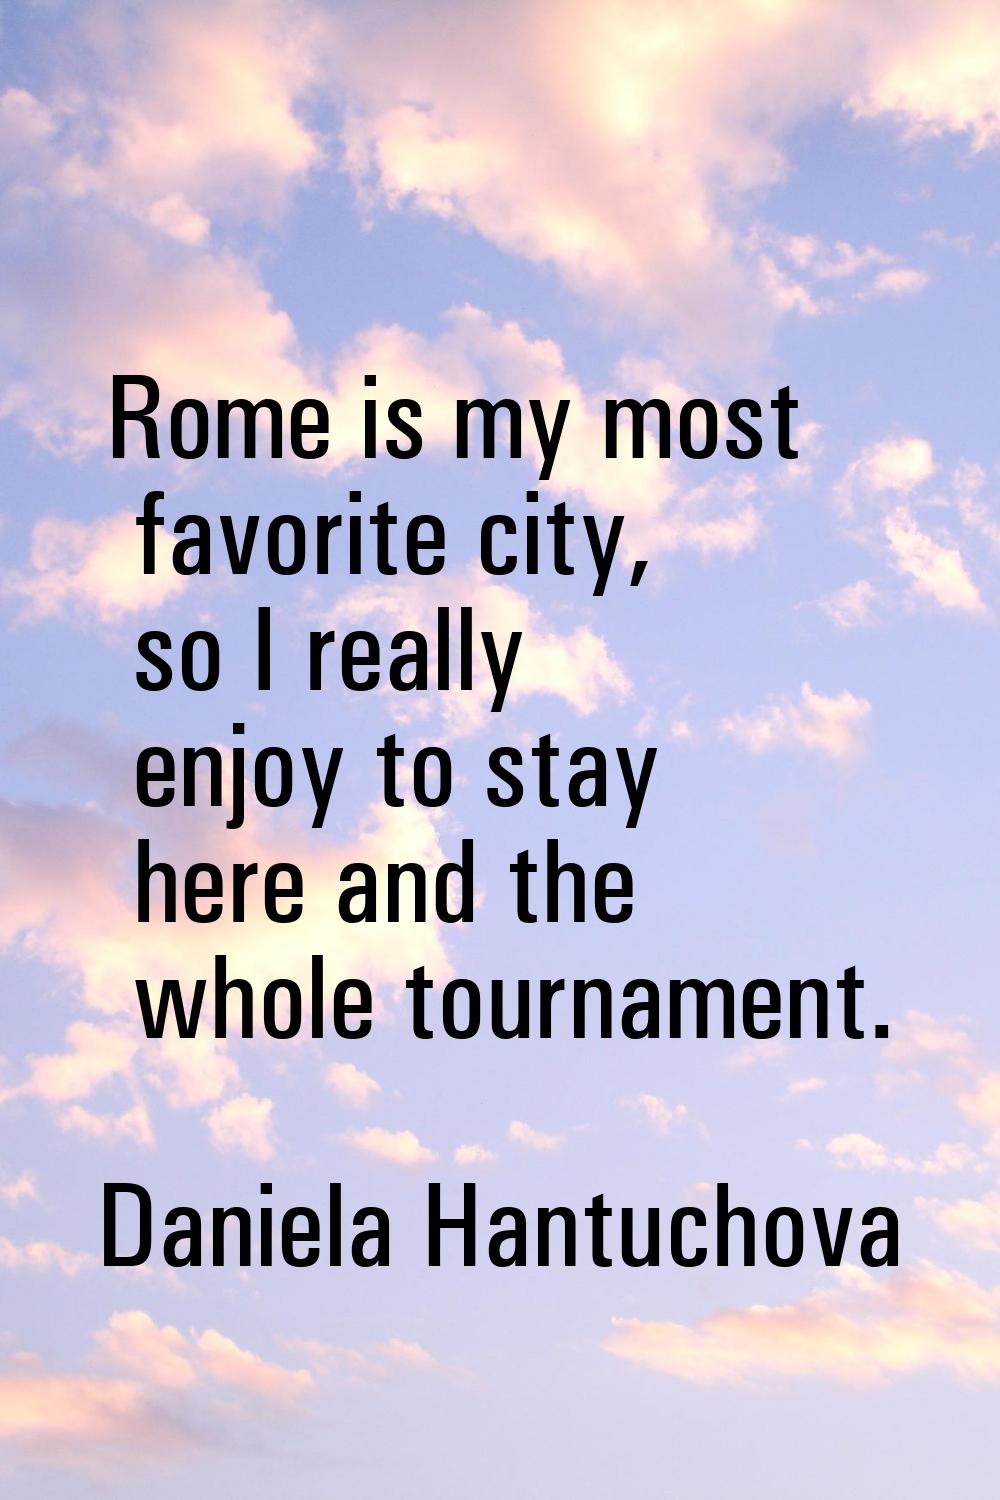 Rome is my most favorite city, so I really enjoy to stay here and the whole tournament.